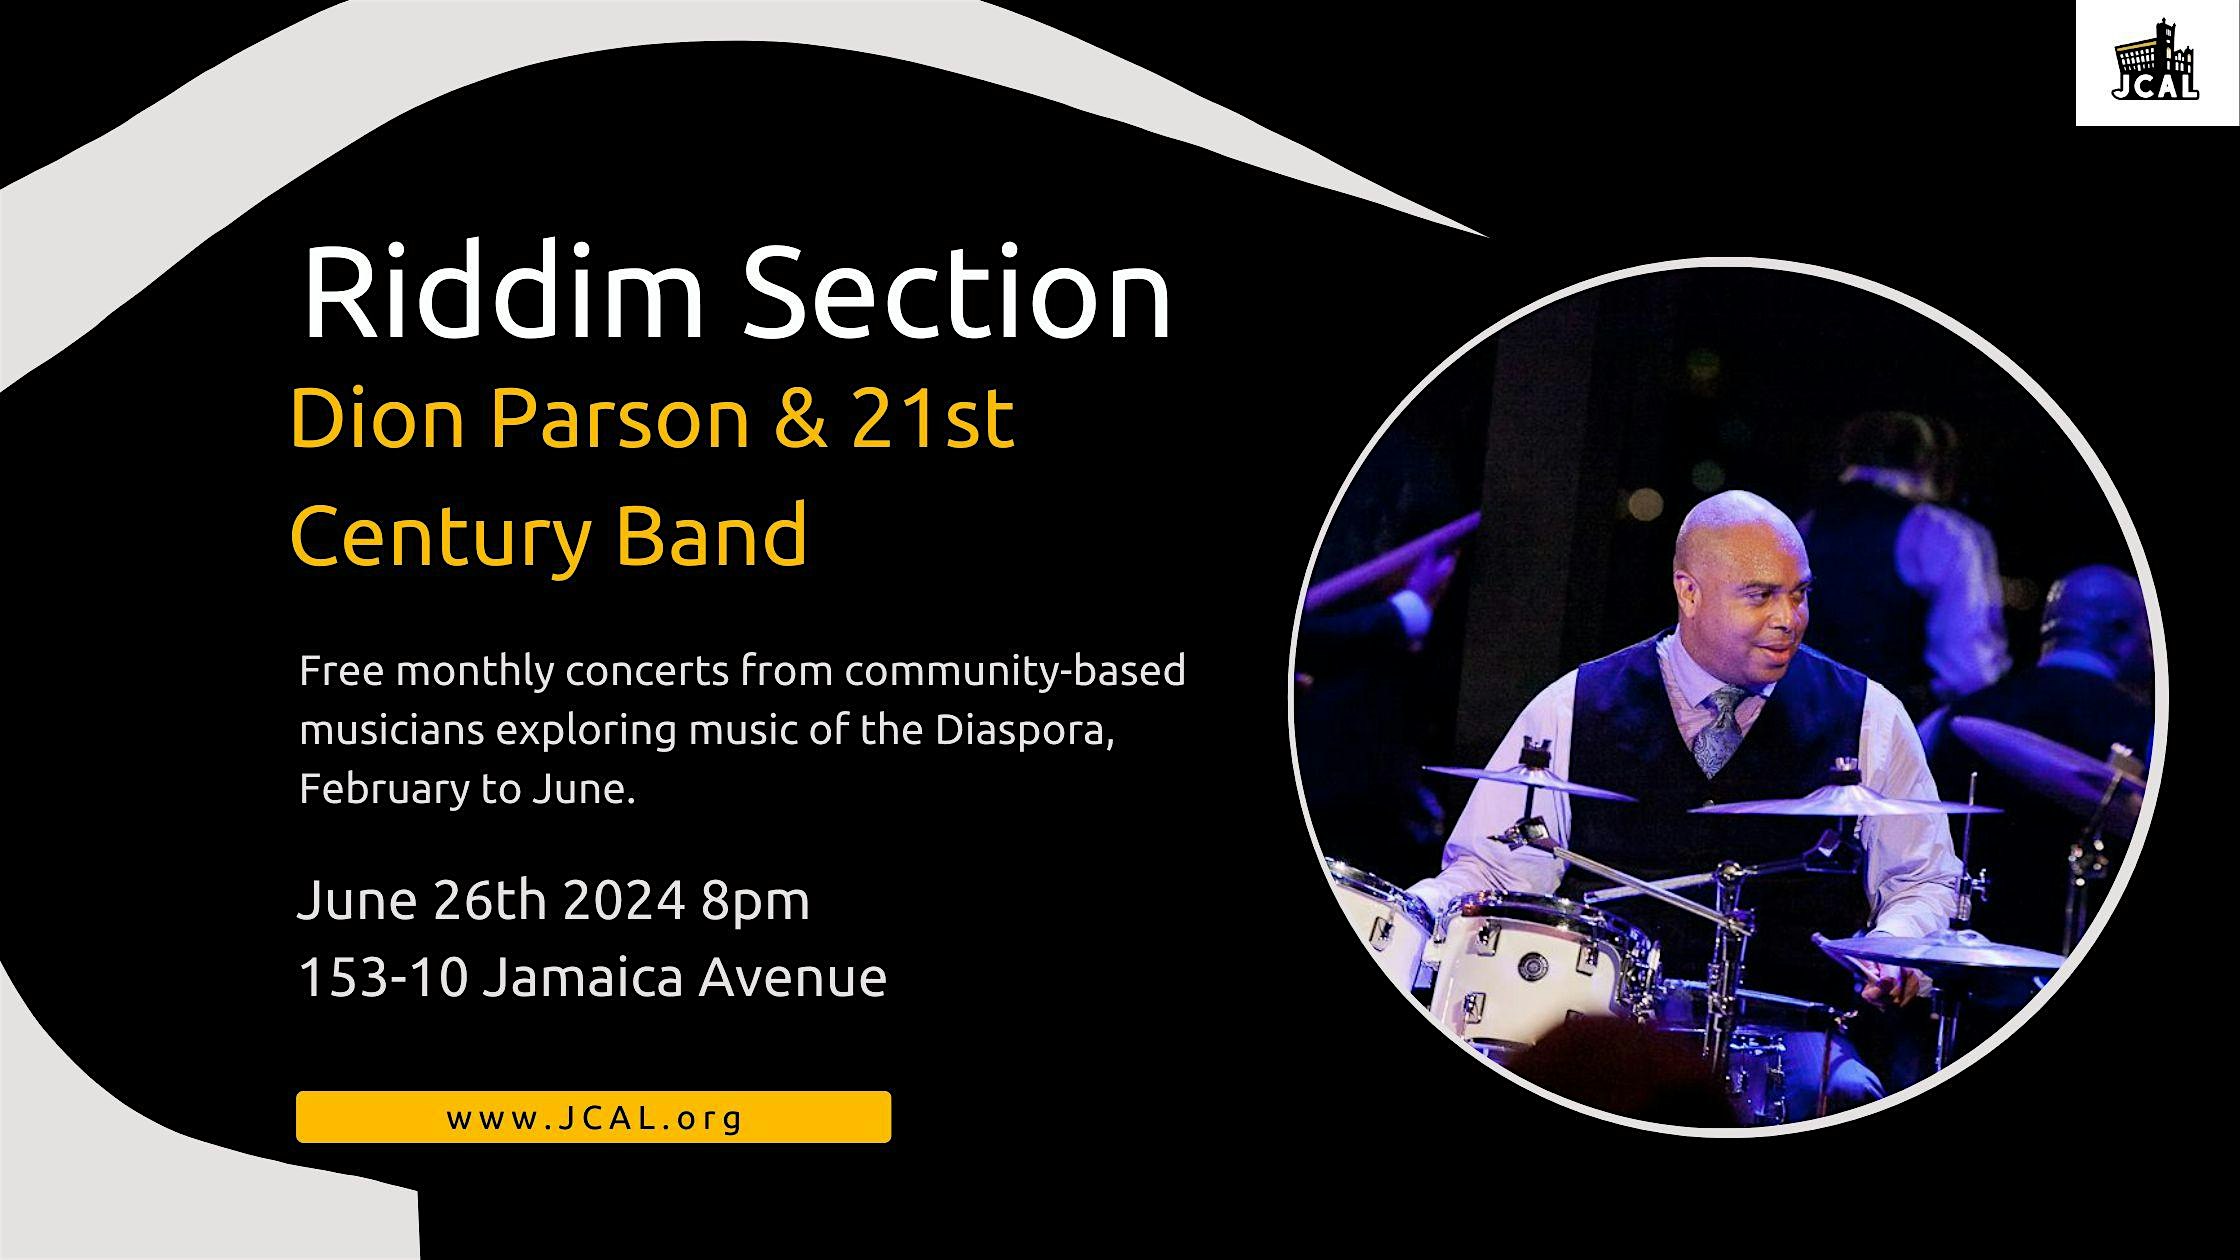 Riddim Section Presents: Dion Parson & 21st Century Band